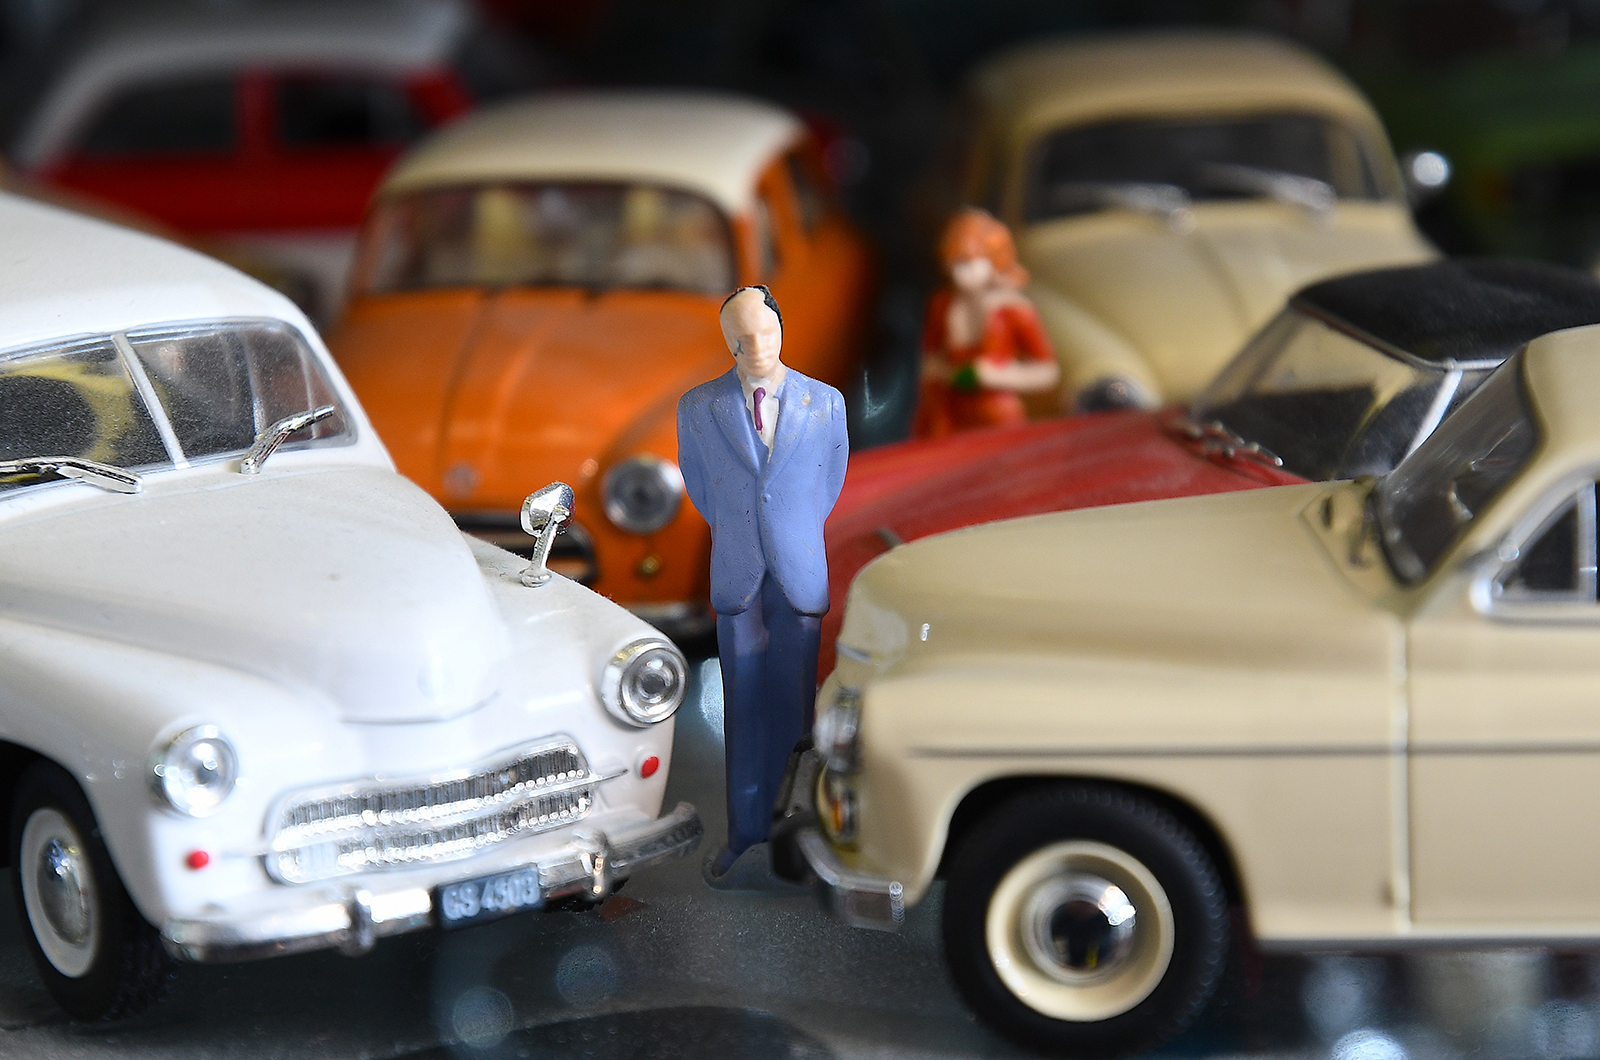 Classic & Sports Car – Also in my garage: 5000 model cars